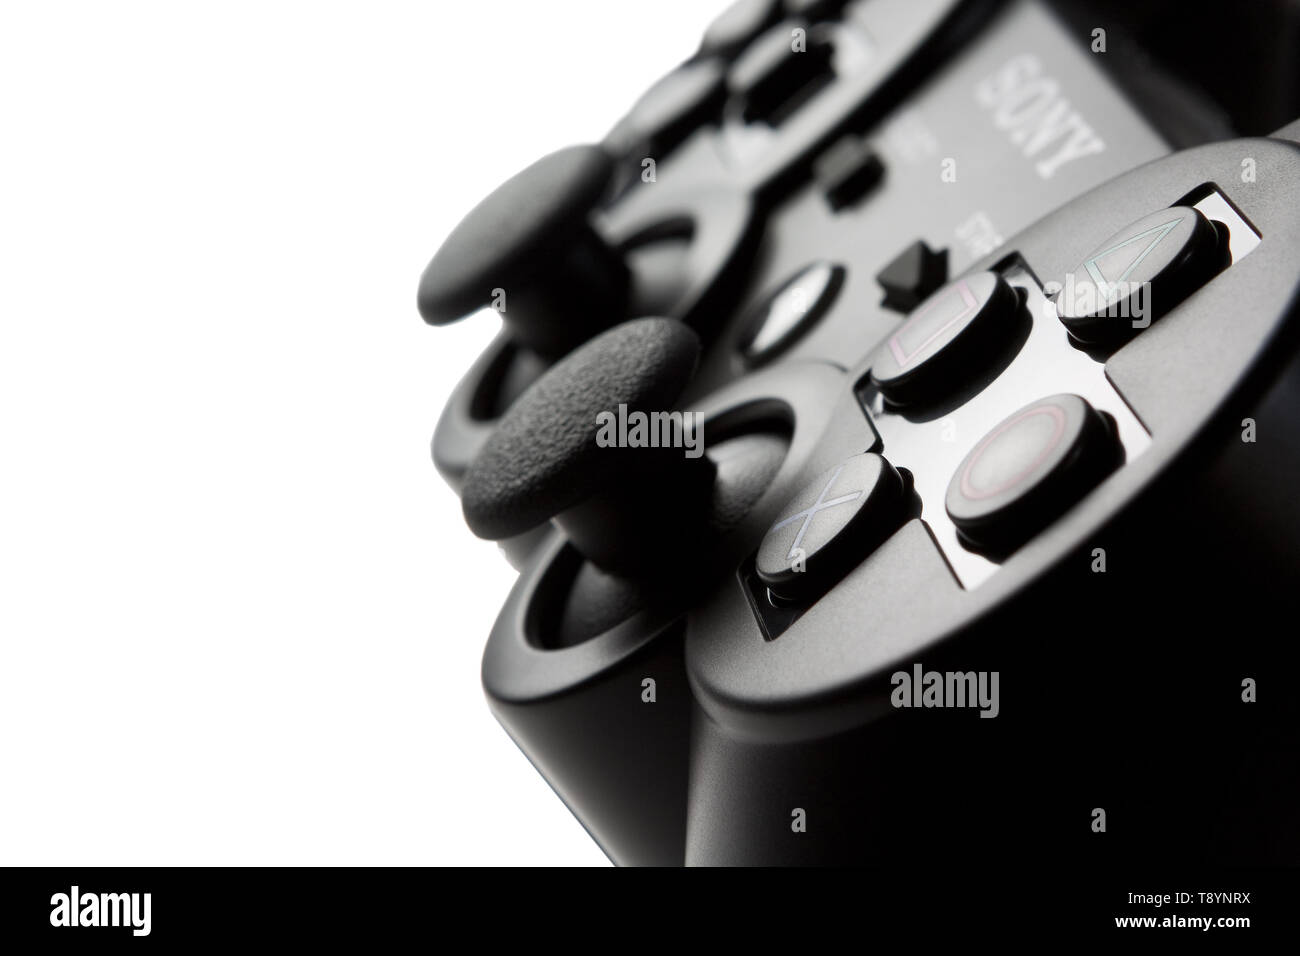 A Sony Playstation 3 PS3 games console controller. Stock Photo